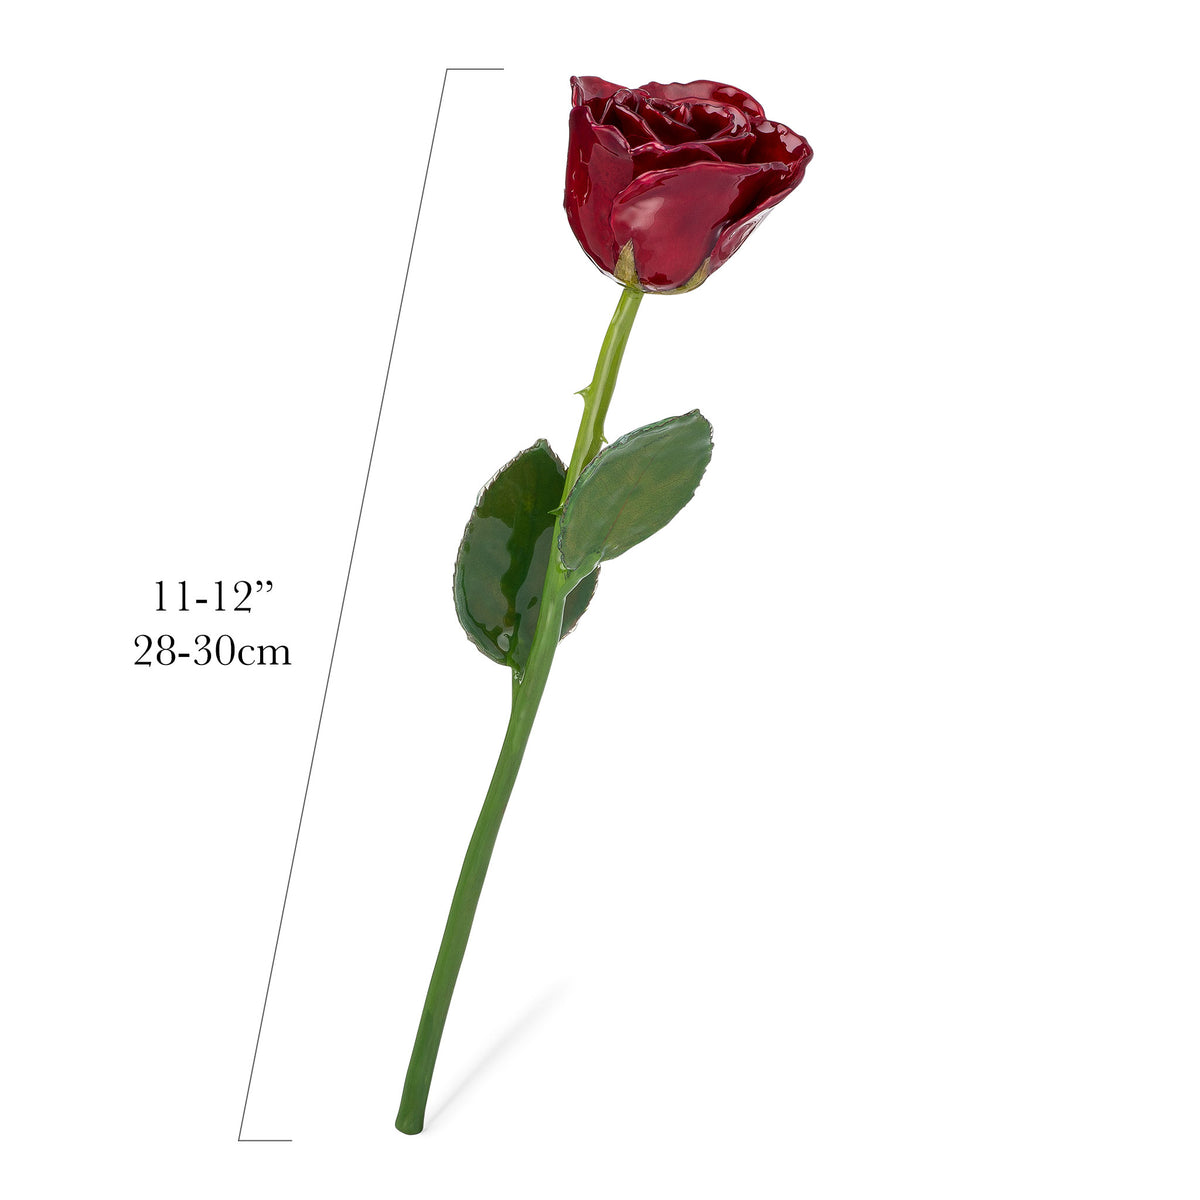 Natural (Green Stem) Forever Rose with Deep Red, Burgundy Colored Petals. View of Stem, Leaves, and Rose Petals. This a Forever Rose without any gold or other precious metals on it. This view shows measurements